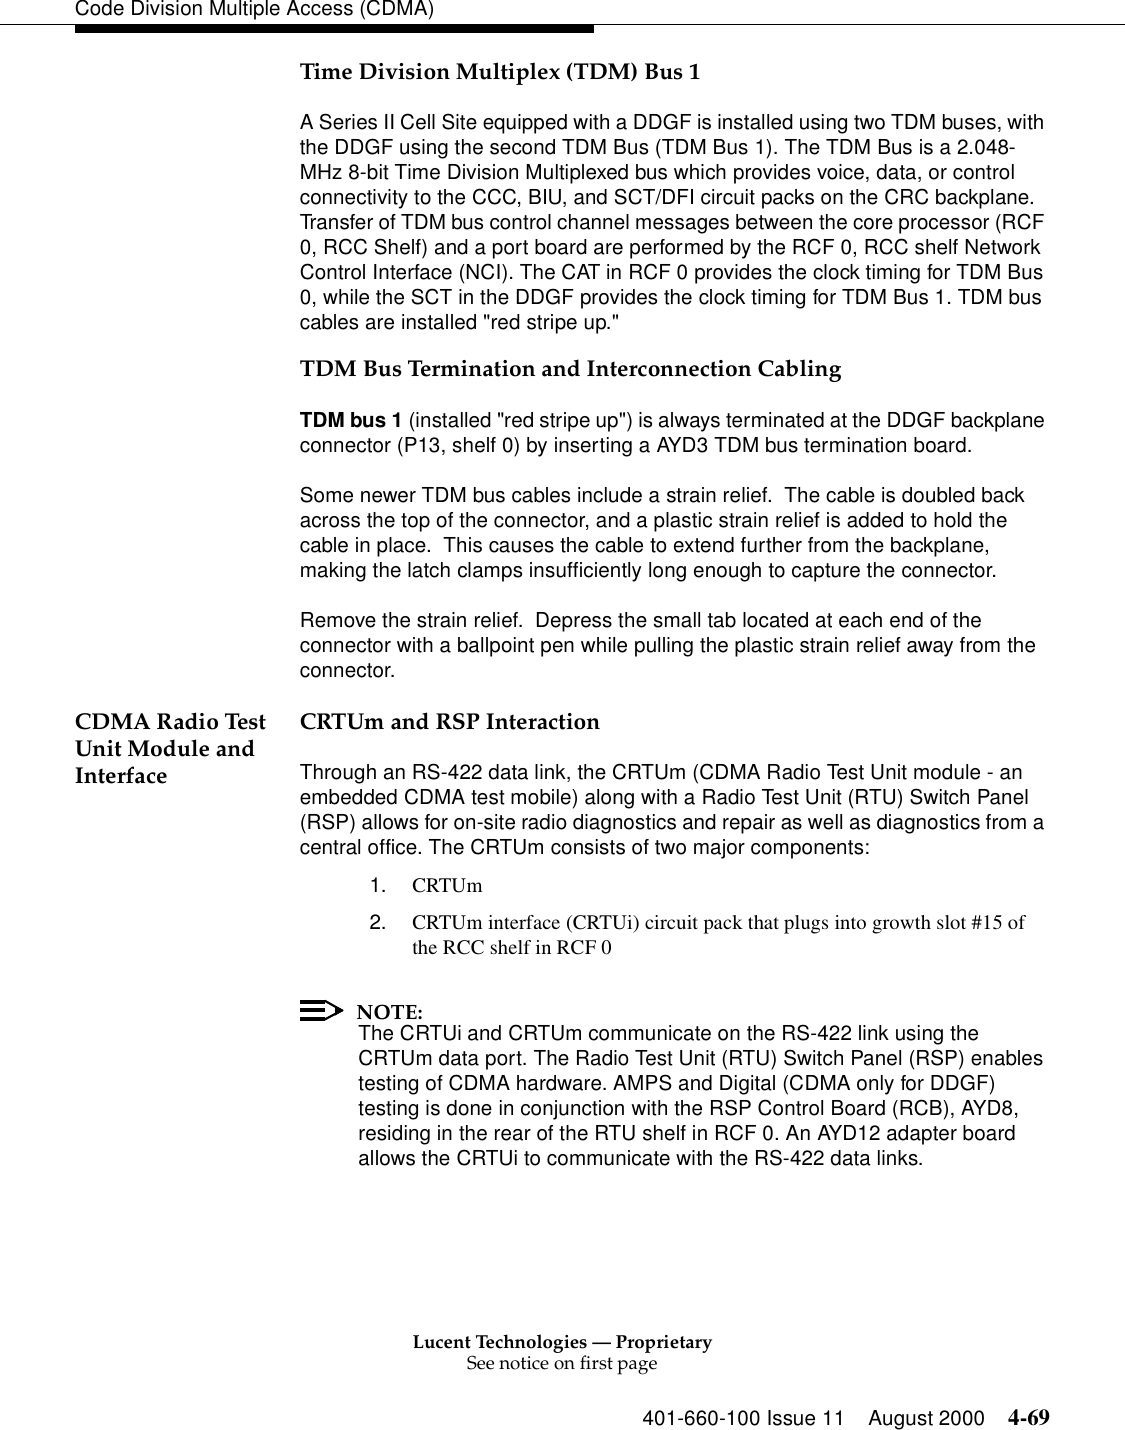 Lucent Technologies — ProprietarySee notice on first page401-660-100 Issue 11 August 2000 4-69Code Division Multiple Access (CDMA)Time Division Multiplex (TDM) Bus 1A Series II Cell Site equipped with a DDGF is installed using two TDM buses, with the DDGF using the second TDM Bus (TDM Bus 1). The TDM Bus is a 2.048-MHz 8-bit Time Division Multiplexed bus which provides voice, data, or control connectivity to the CCC, BIU, and SCT/DFI circuit packs on the CRC backplane. Transfer of TDM bus control channel messages between the core processor (RCF 0, RCC Shelf) and a port board are performed by the RCF 0, RCC shelf Network Control Interface (NCI). The CAT in RCF 0 provides the clock timing for TDM Bus 0, while the SCT in the DDGF provides the clock timing for TDM Bus 1. TDM bus cables are installed &quot;red stripe up.&quot;  TDM Bus Termination and Interconnection CablingTDM bus 1 (installed &quot;red stripe up&quot;) is always terminated at the DDGF backplane connector (P13, shelf 0) by inserting a AYD3 TDM bus termination board.Some newer TDM bus cables include a strain relief.  The cable is doubled back across the top of the connector, and a plastic strain relief is added to hold the cable in place.  This causes the cable to extend further from the backplane, making the latch clamps insufficiently long enough to capture the connector.Remove the strain relief.  Depress the small tab located at each end of the connector with a ballpoint pen while pulling the plastic strain relief away from the connector.CDMA Radio Test Unit Module and InterfaceCRTUm and RSP InteractionThrough an RS-422 data link, the CRTUm (CDMA Radio Test Unit module - an embedded CDMA test mobile) along with a Radio Test Unit (RTU) Switch Panel (RSP) allows for on-site radio diagnostics and repair as well as diagnostics from a central office. The CRTUm consists of two major components:1. CRTUm2. CRTUm interface (CRTUi) circuit pack that plugs into growth slot #15 of the RCC shelf in RCF 0NOTE:The CRTUi and CRTUm communicate on the RS-422 link using the CRTUm data port. The Radio Test Unit (RTU) Switch Panel (RSP) enables testing of CDMA hardware. AMPS and Digital (CDMA only for DDGF) testing is done in conjunction with the RSP Control Board (RCB), AYD8, residing in the rear of the RTU shelf in RCF 0. An AYD12 adapter board allows the CRTUi to communicate with the RS-422 data links.